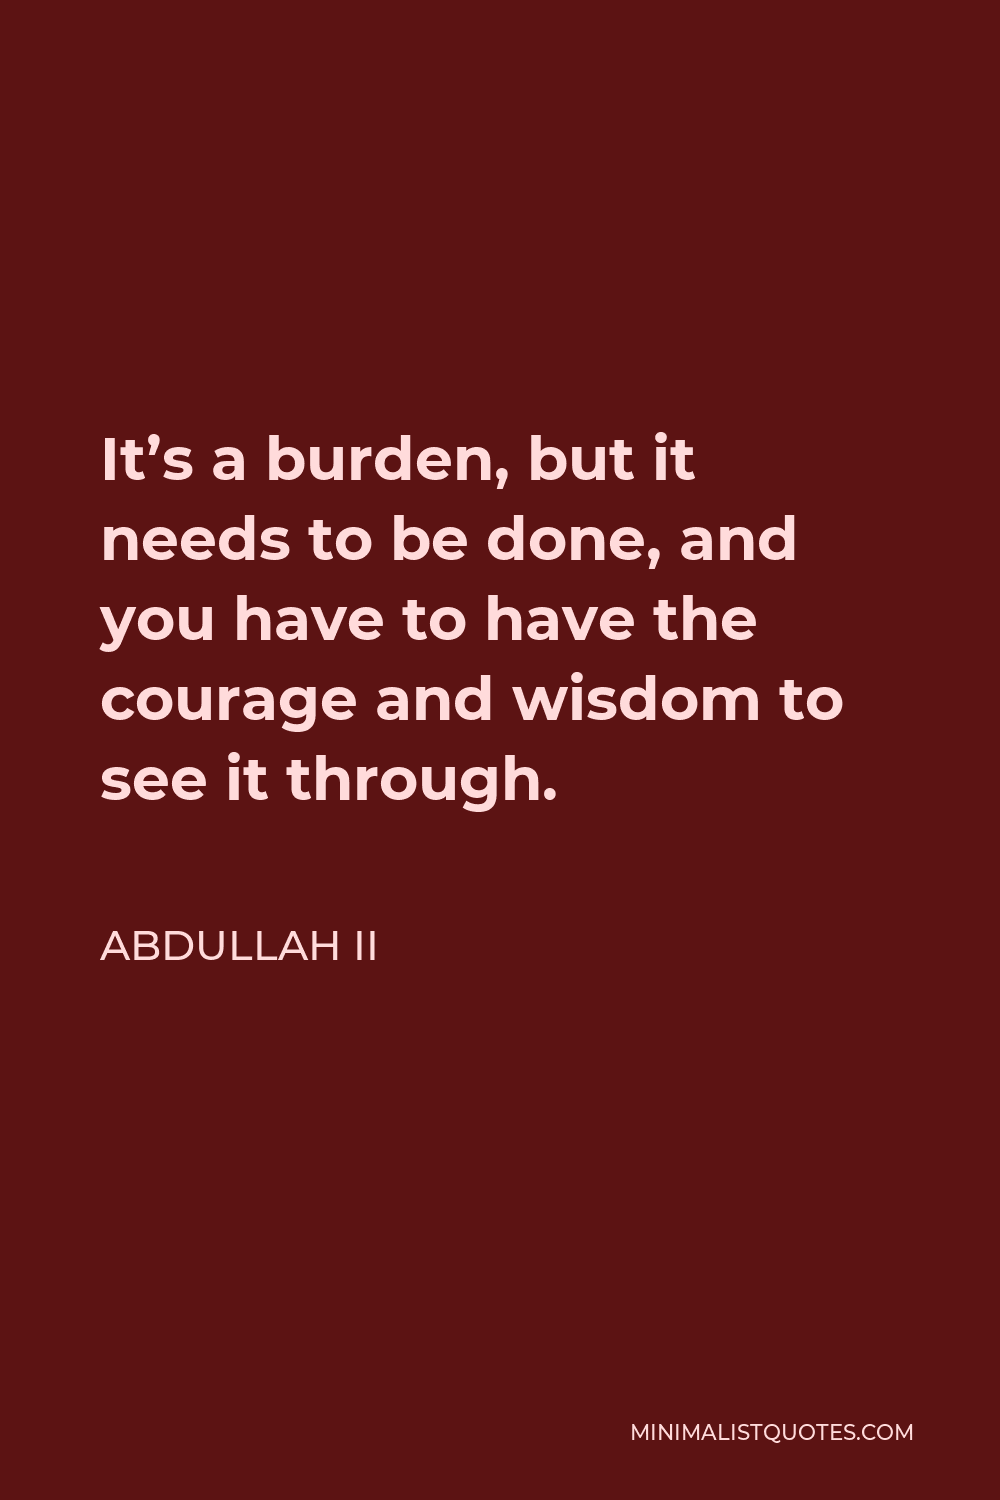 Abdullah II Quote - It’s a burden, but it needs to be done, and you have to have the courage and wisdom to see it through.